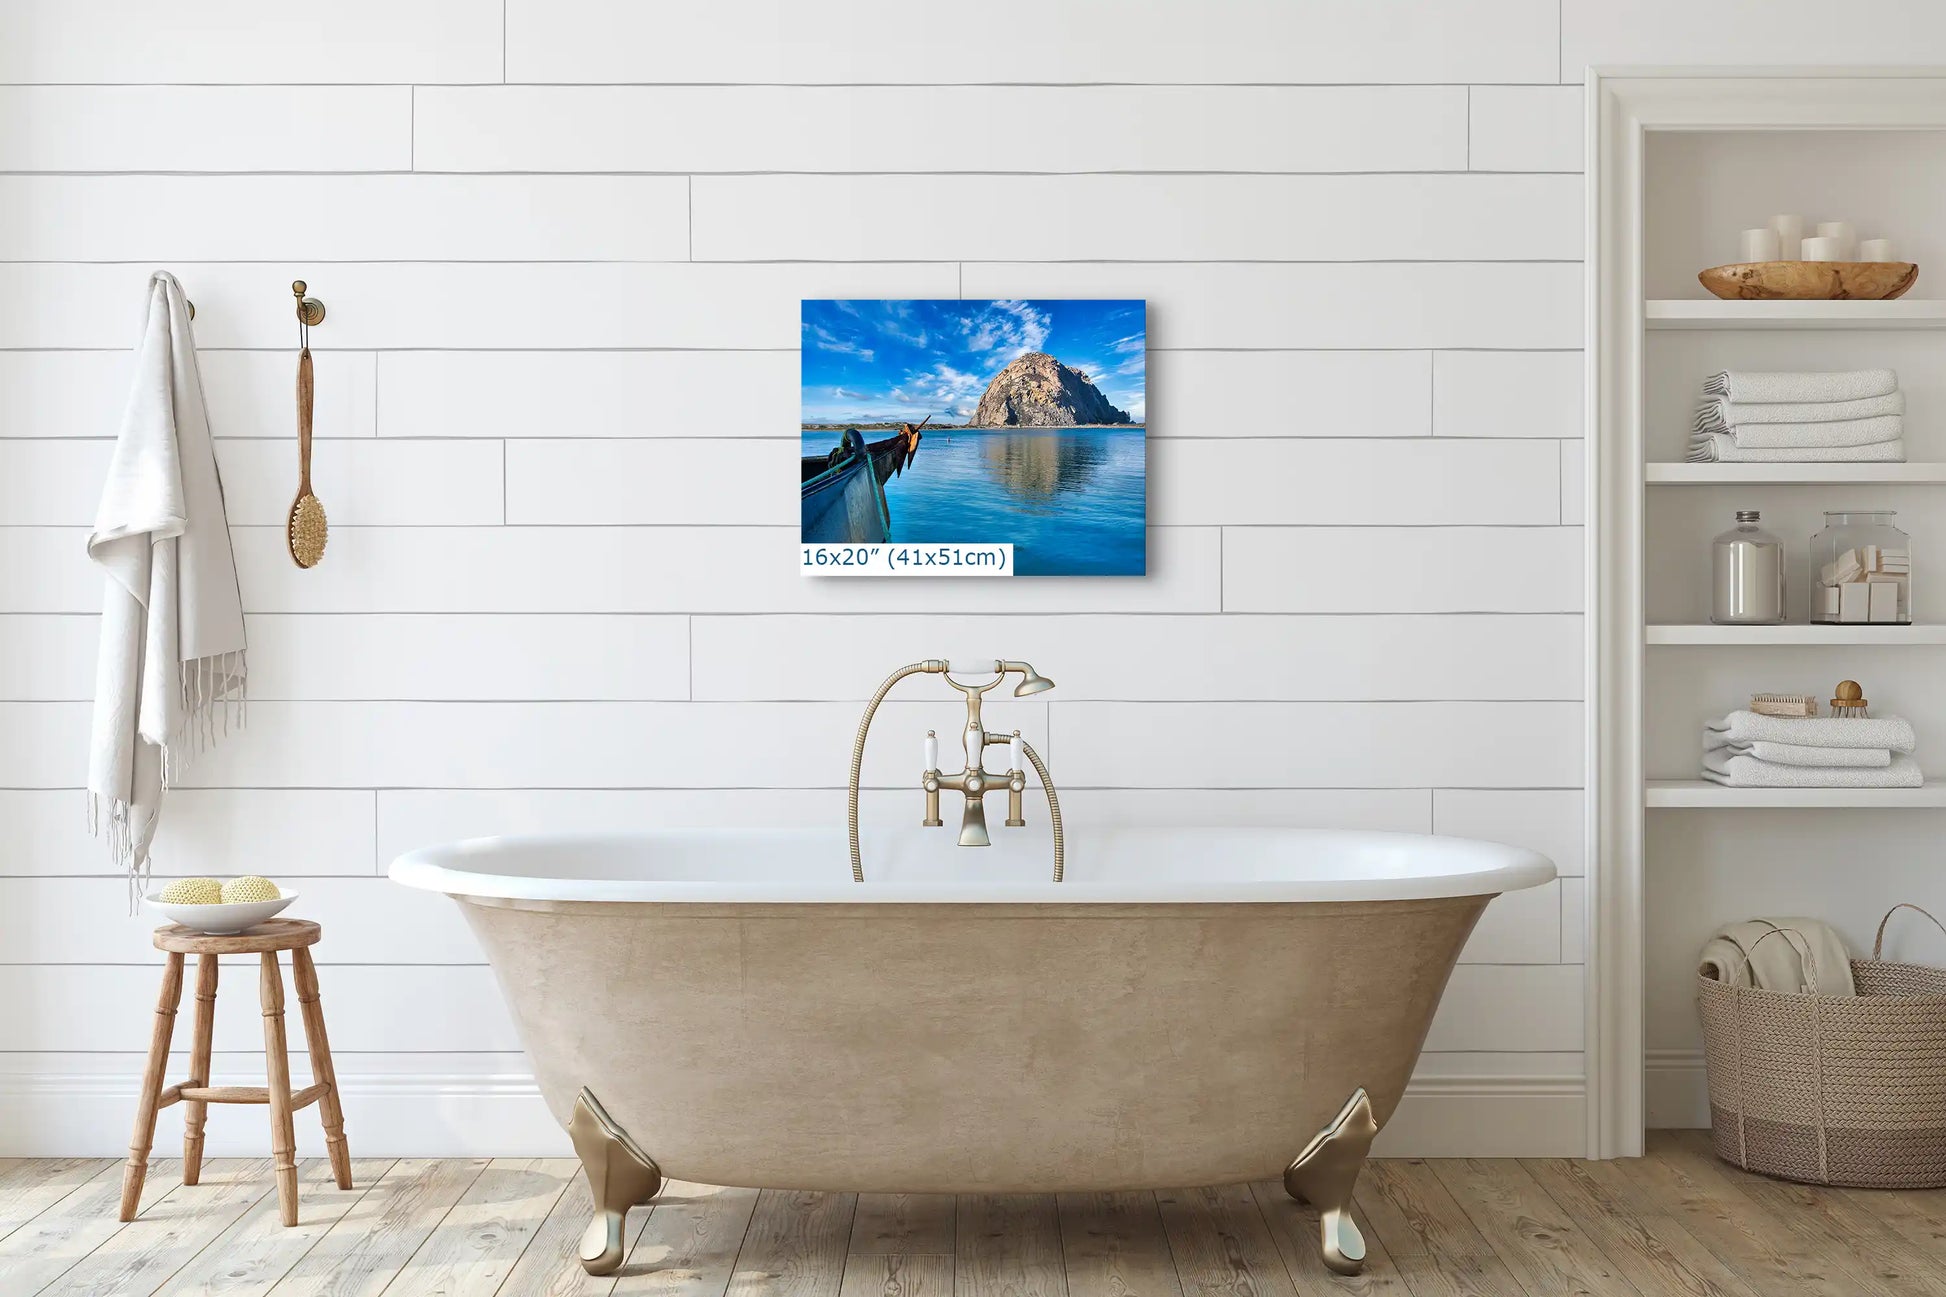 A 16x20 canvas artwork in a bathroom setting, inviting the calmness of Morro Rock and its surrounding waters into the intimate space.